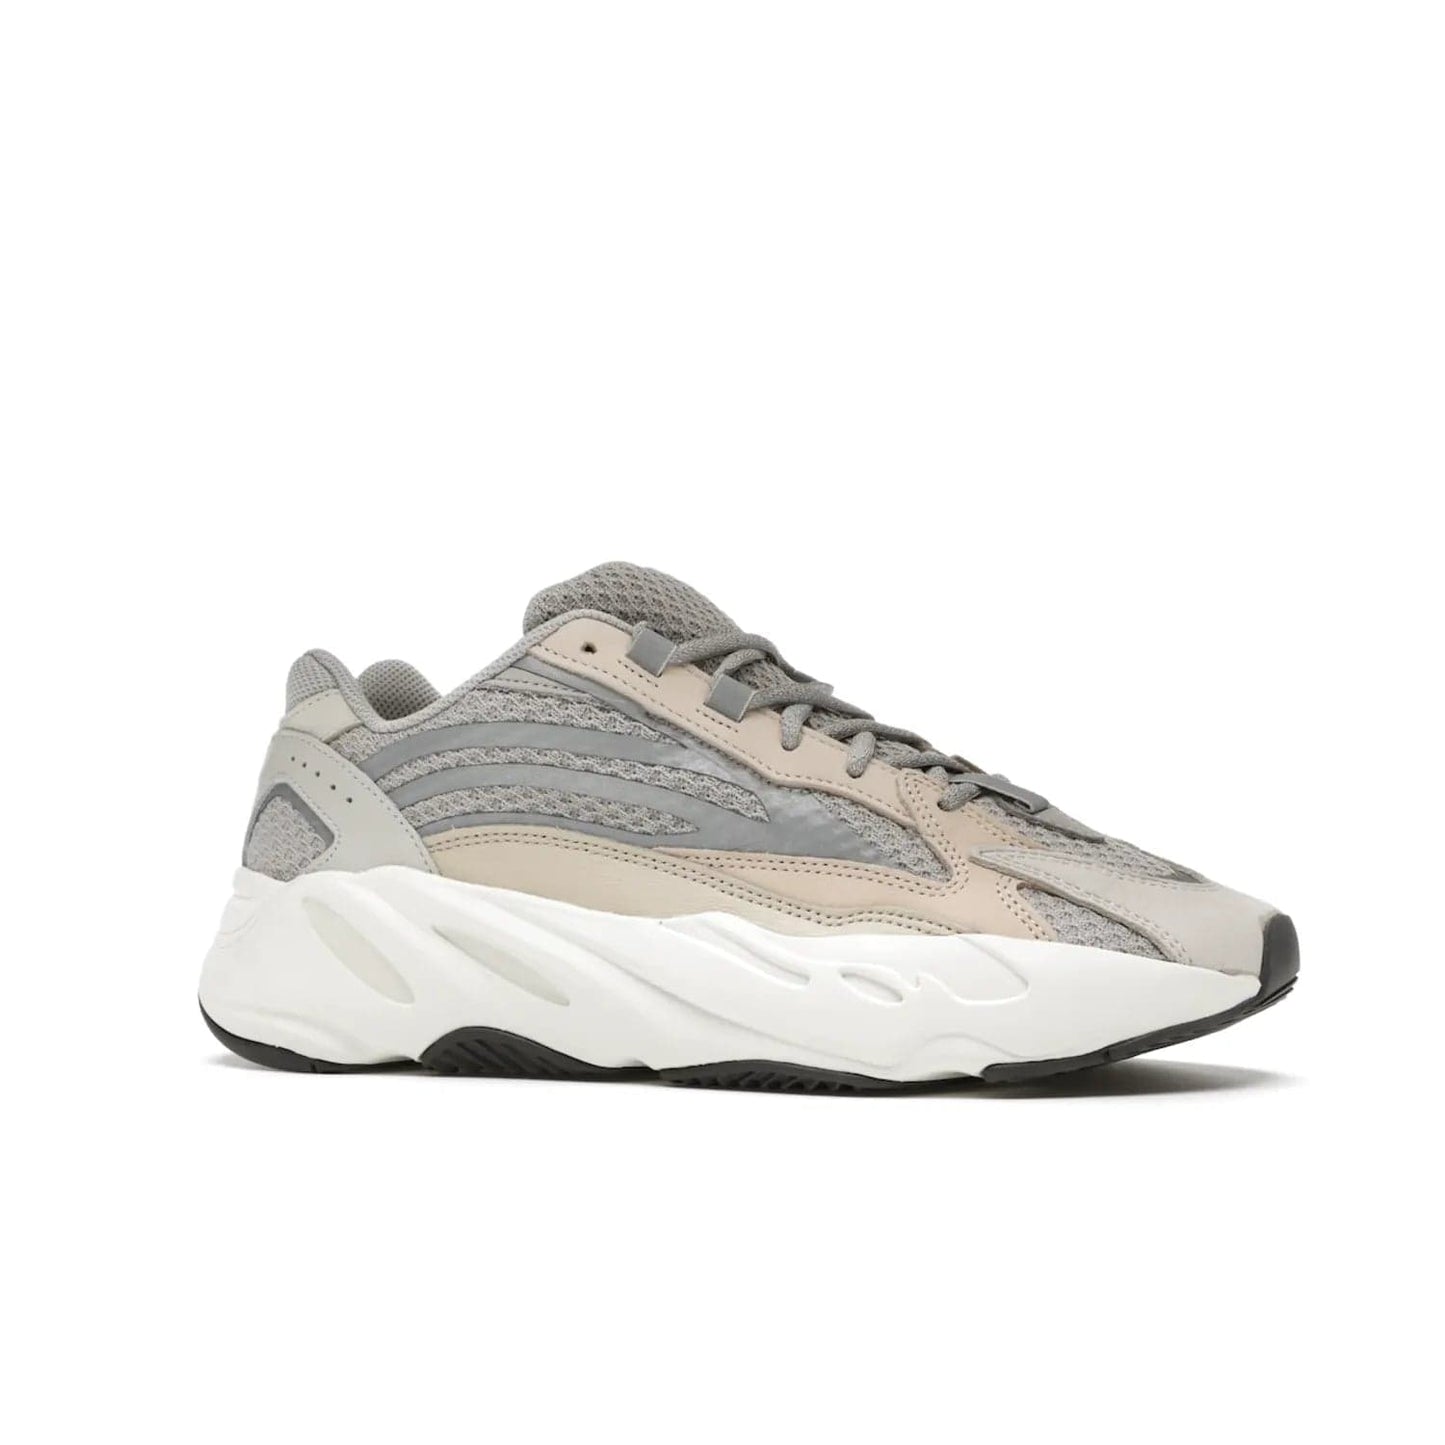 adidas Yeezy Boost 700 V2 Cream - Image 3 - Only at www.BallersClubKickz.com - Add style and luxury to your wardrobe with the adidas Yeezy 700 V2 Cream. Featuring a unique reflective upper, leather overlays, mesh underlays and the signature BOOST midsole, this silhouette is perfect for any stylish wardrobe.